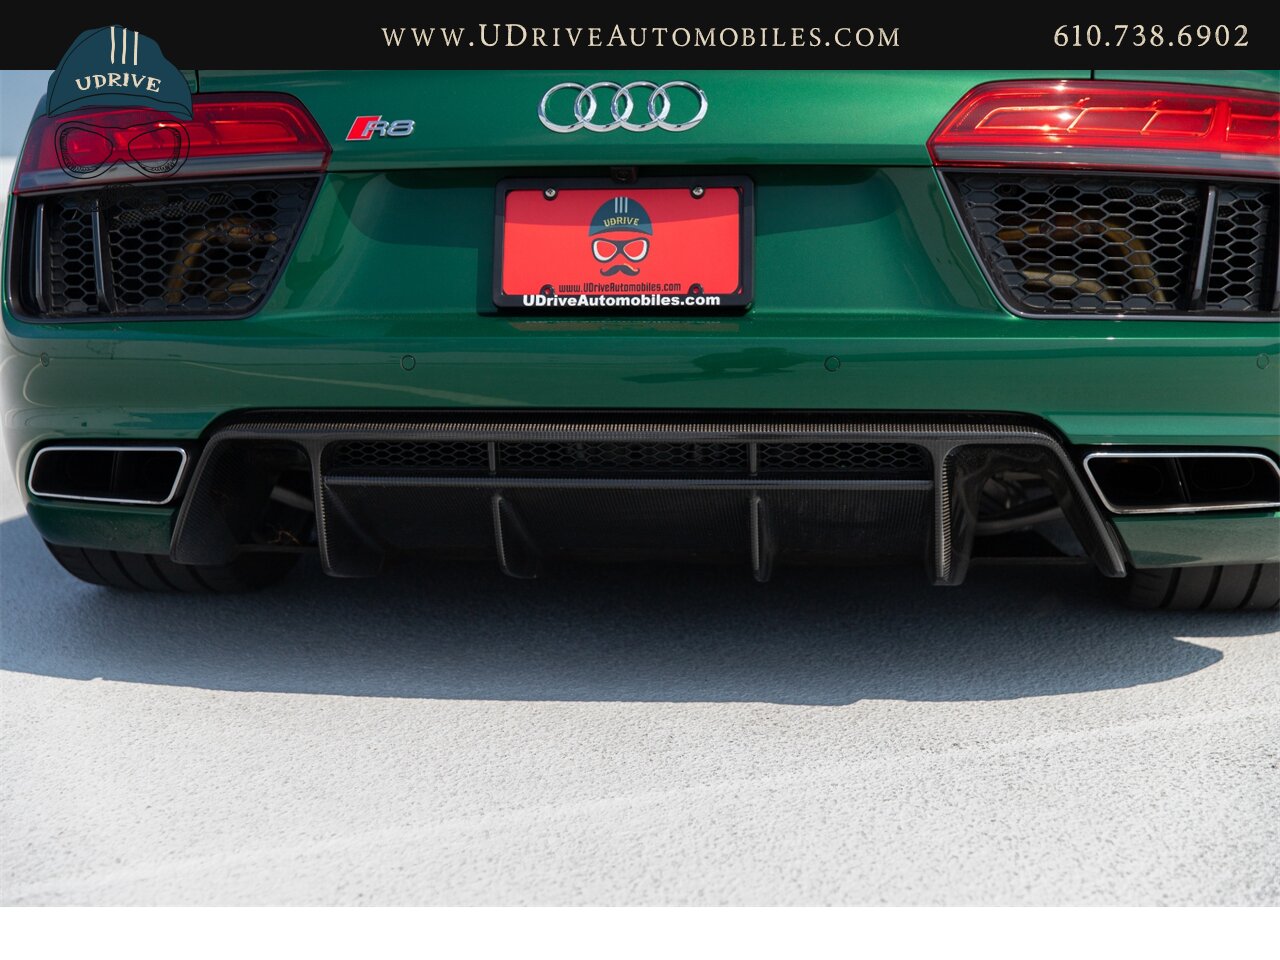 2017 Audi R8 Audi Exclusive Avocado Green Vermont Brown Leather  Diamond Stitching V10 Carbon Fiber - Photo 30 - West Chester, PA 19382